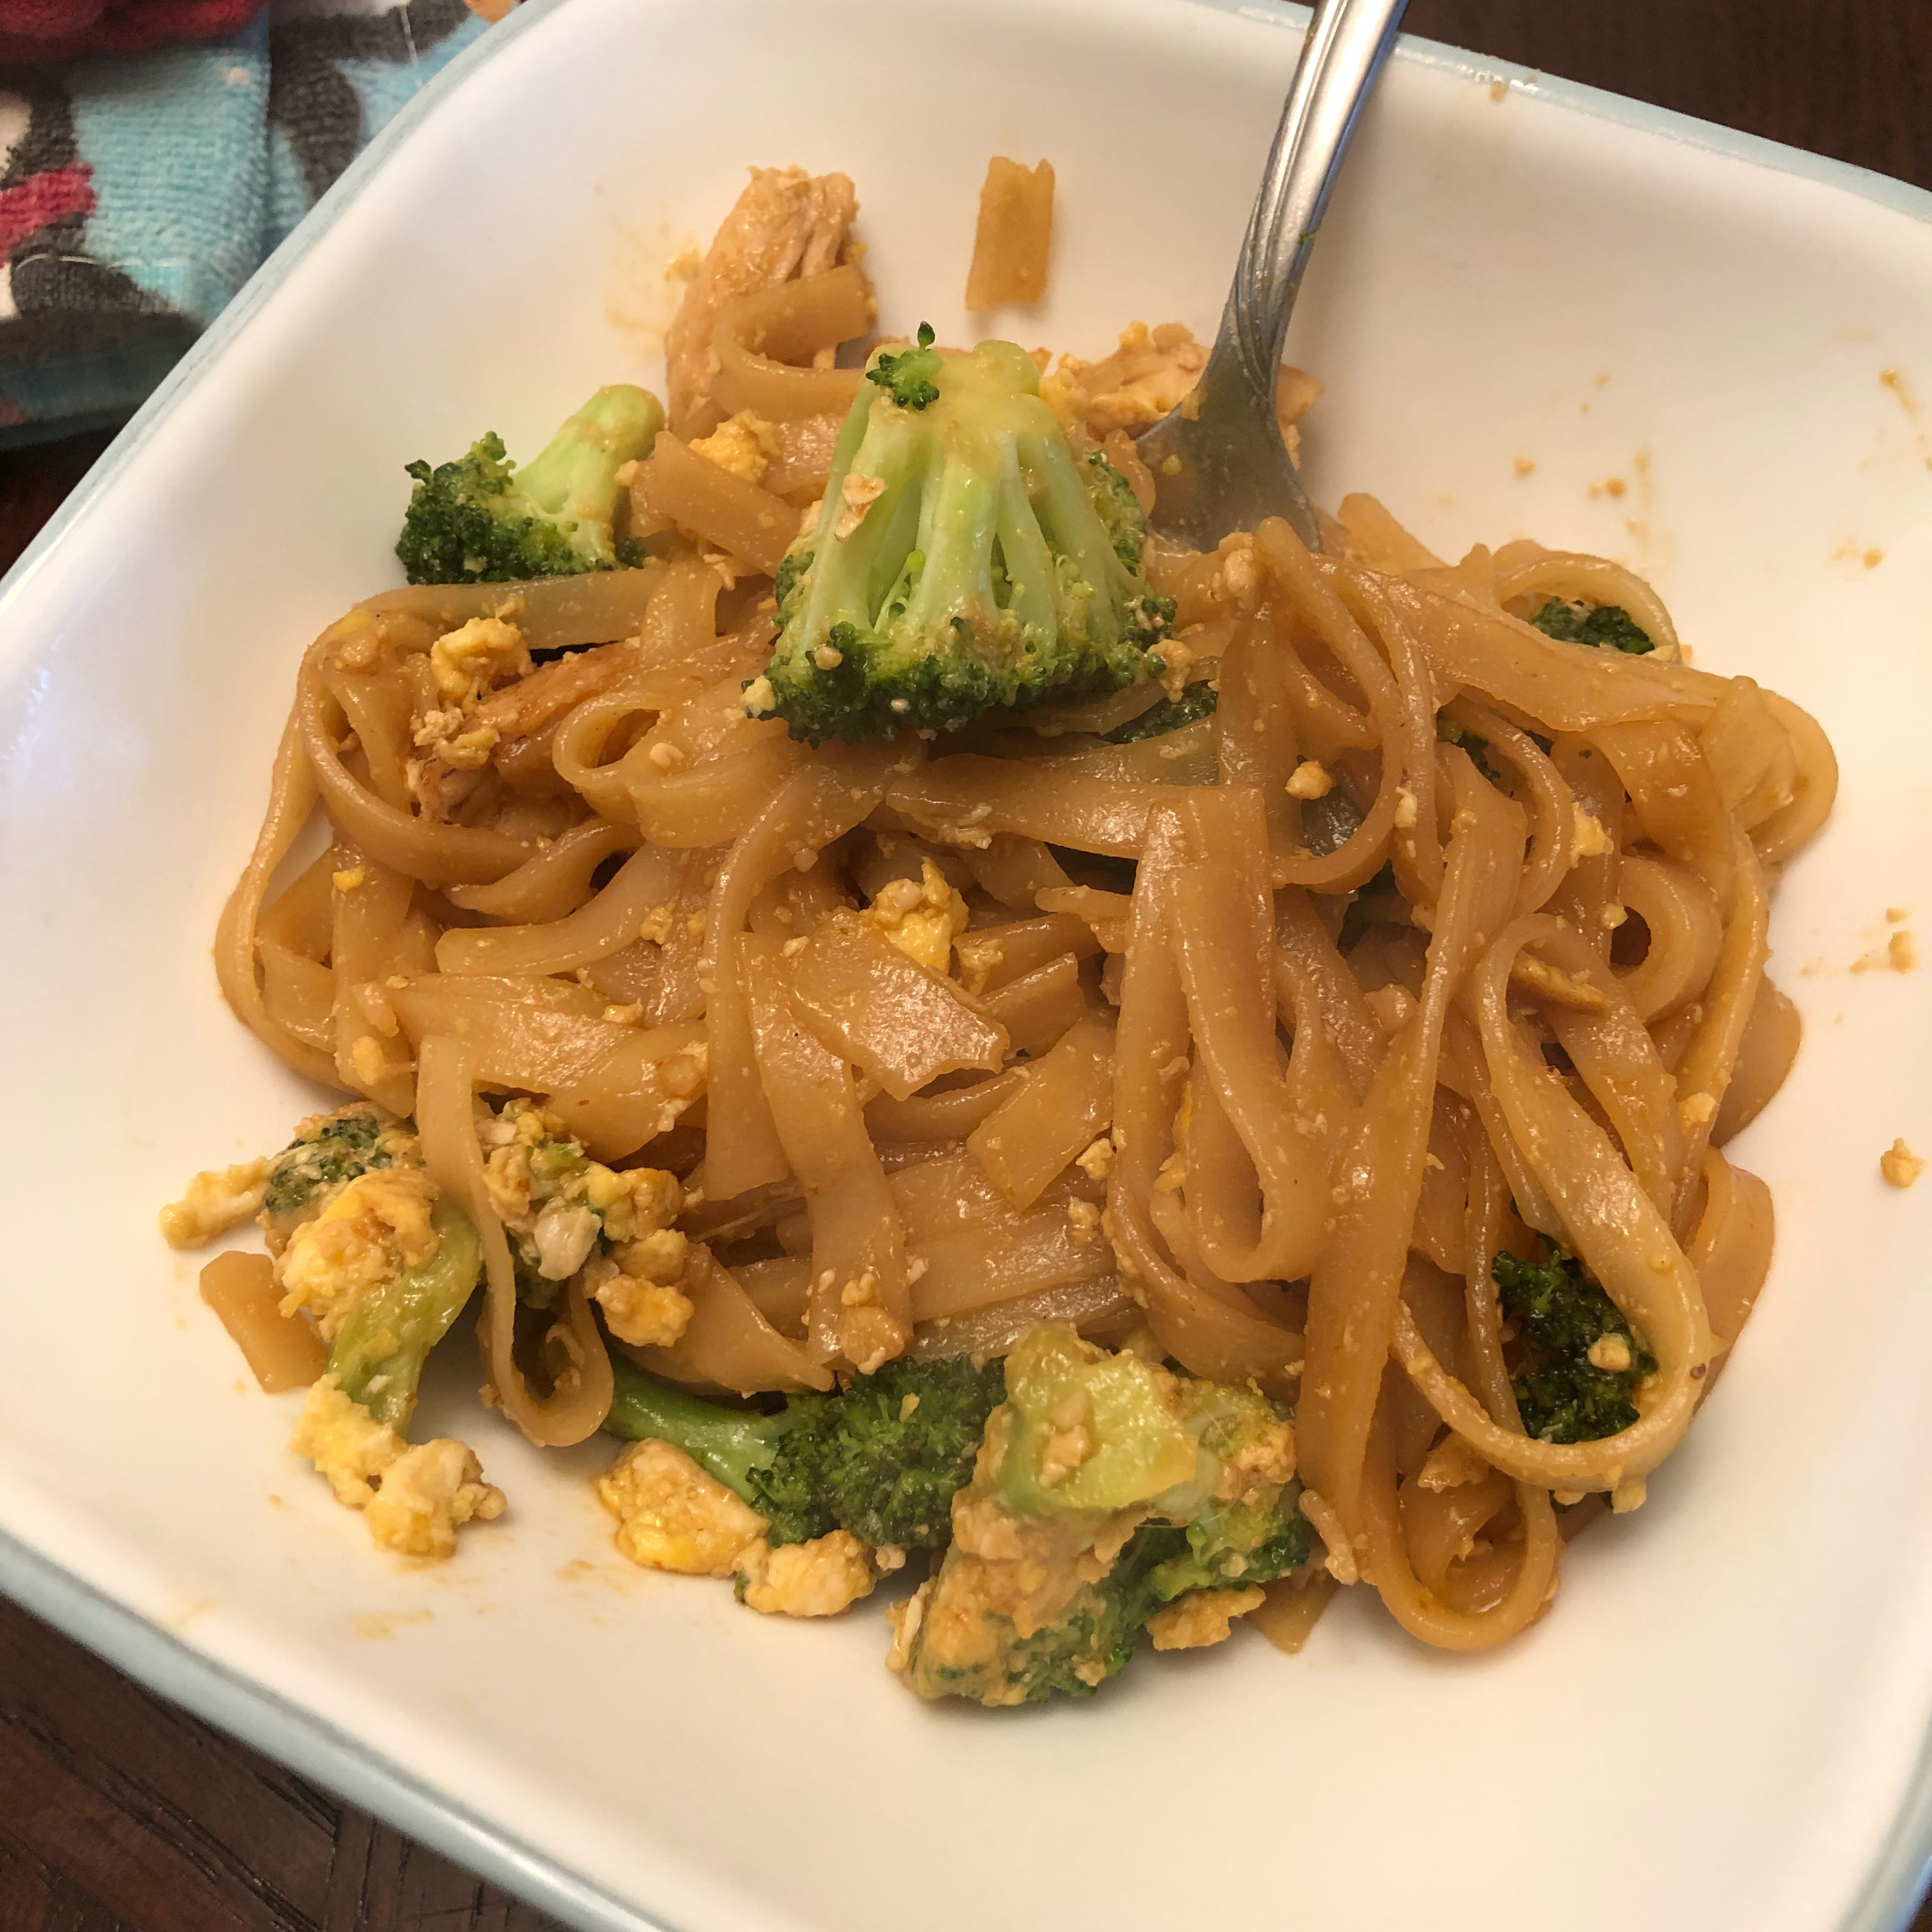 <p>This Pad se eew, or Pad see ew, is made with chicken and frozen broccoli for ease, though you can always opt to use fresh. It's a quick and satisfying dinner that's easy enough for a weeknight after work.</p>
                          